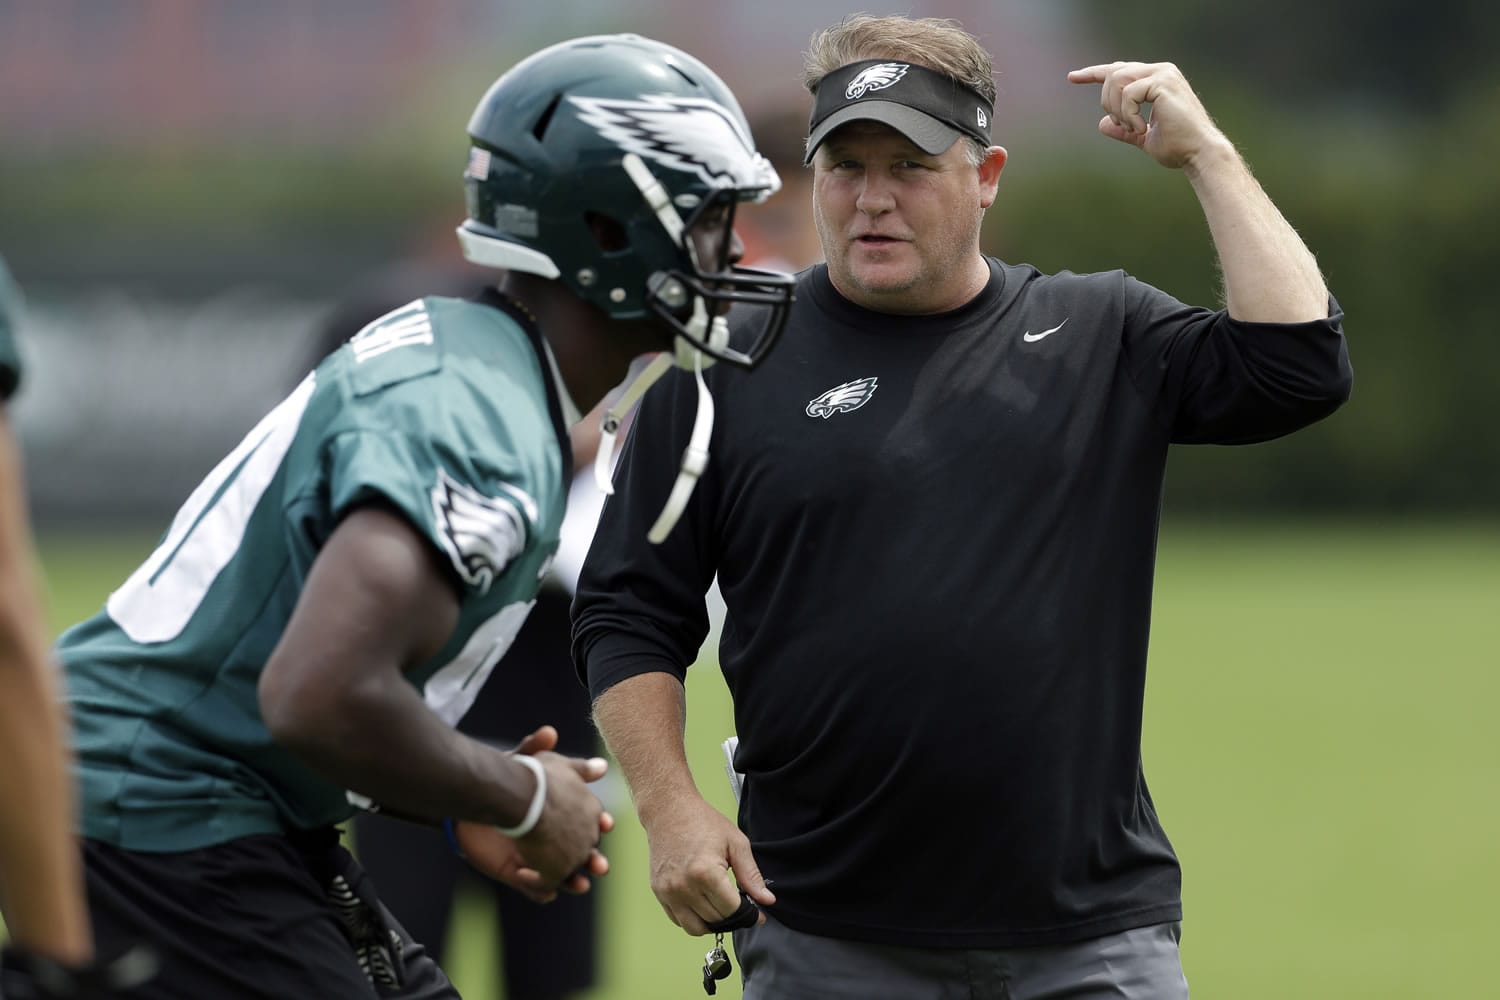 Philadelphia Eagles coach Chip Kelly, right, speaks with Ifeanyi Momah at the NFL football team's training camp in Philadelphia, Tuesday, Aug. 13, 2013.